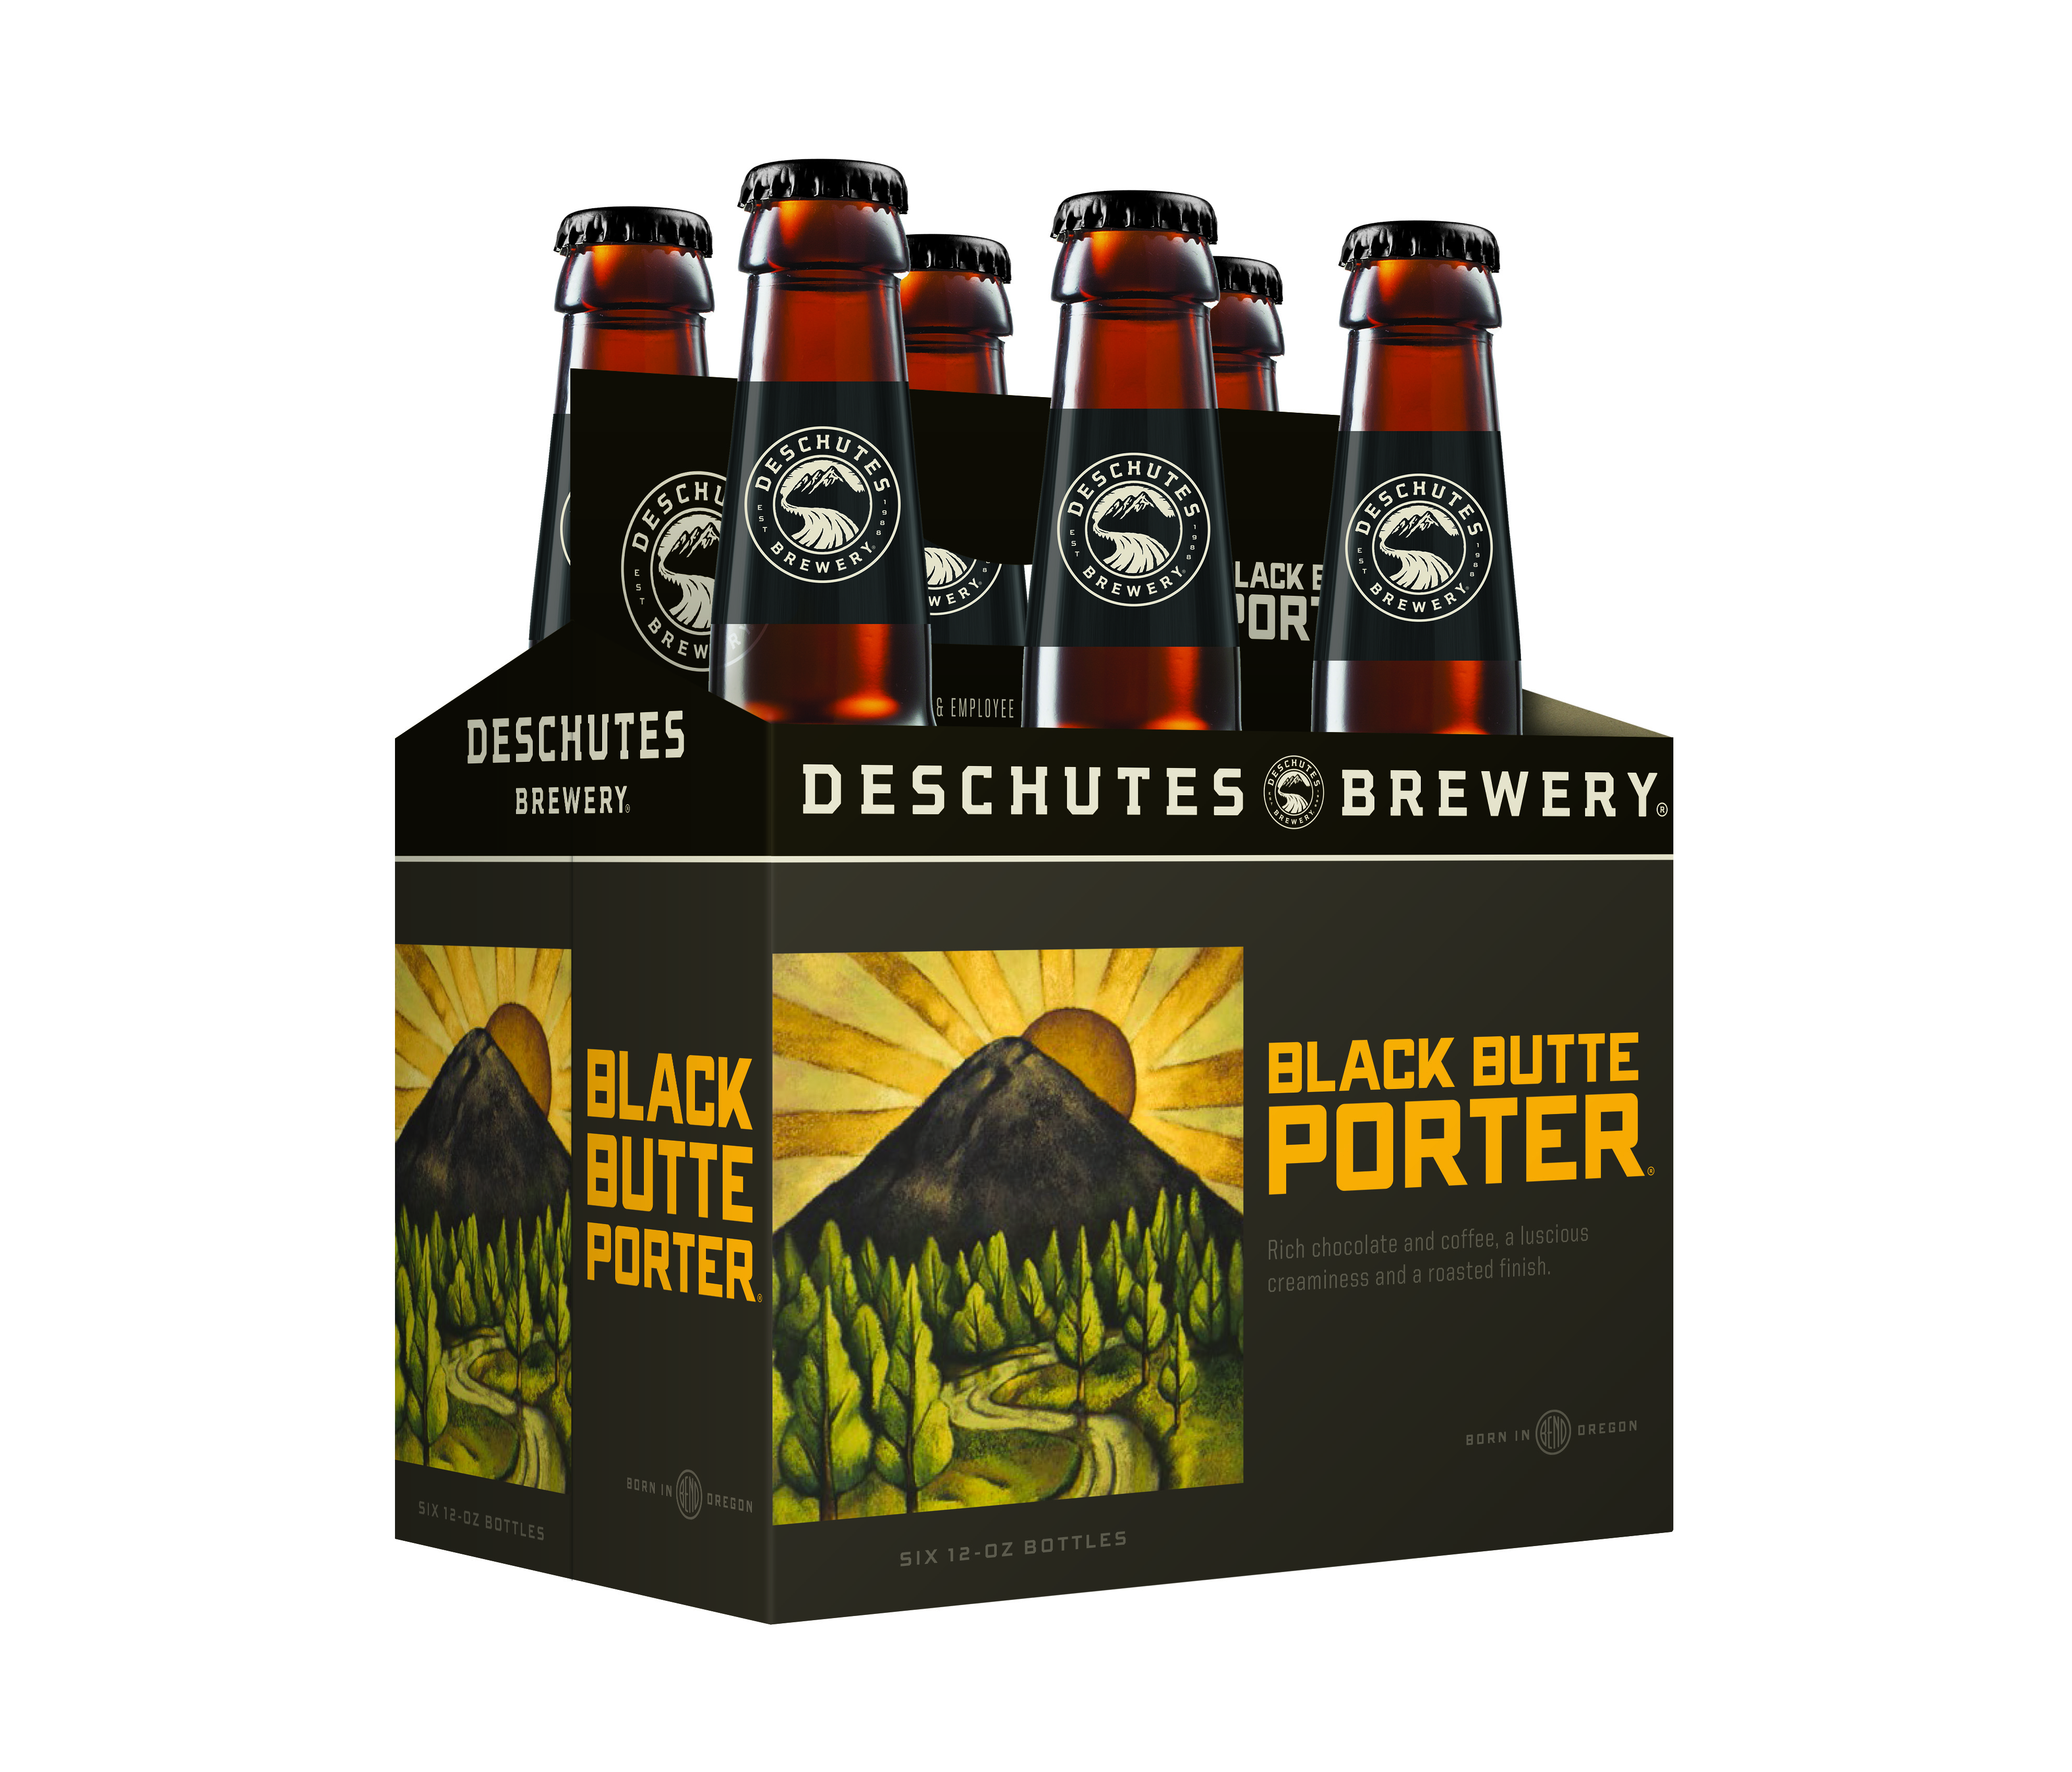 New Markets, Packages on Tap at Deschutes